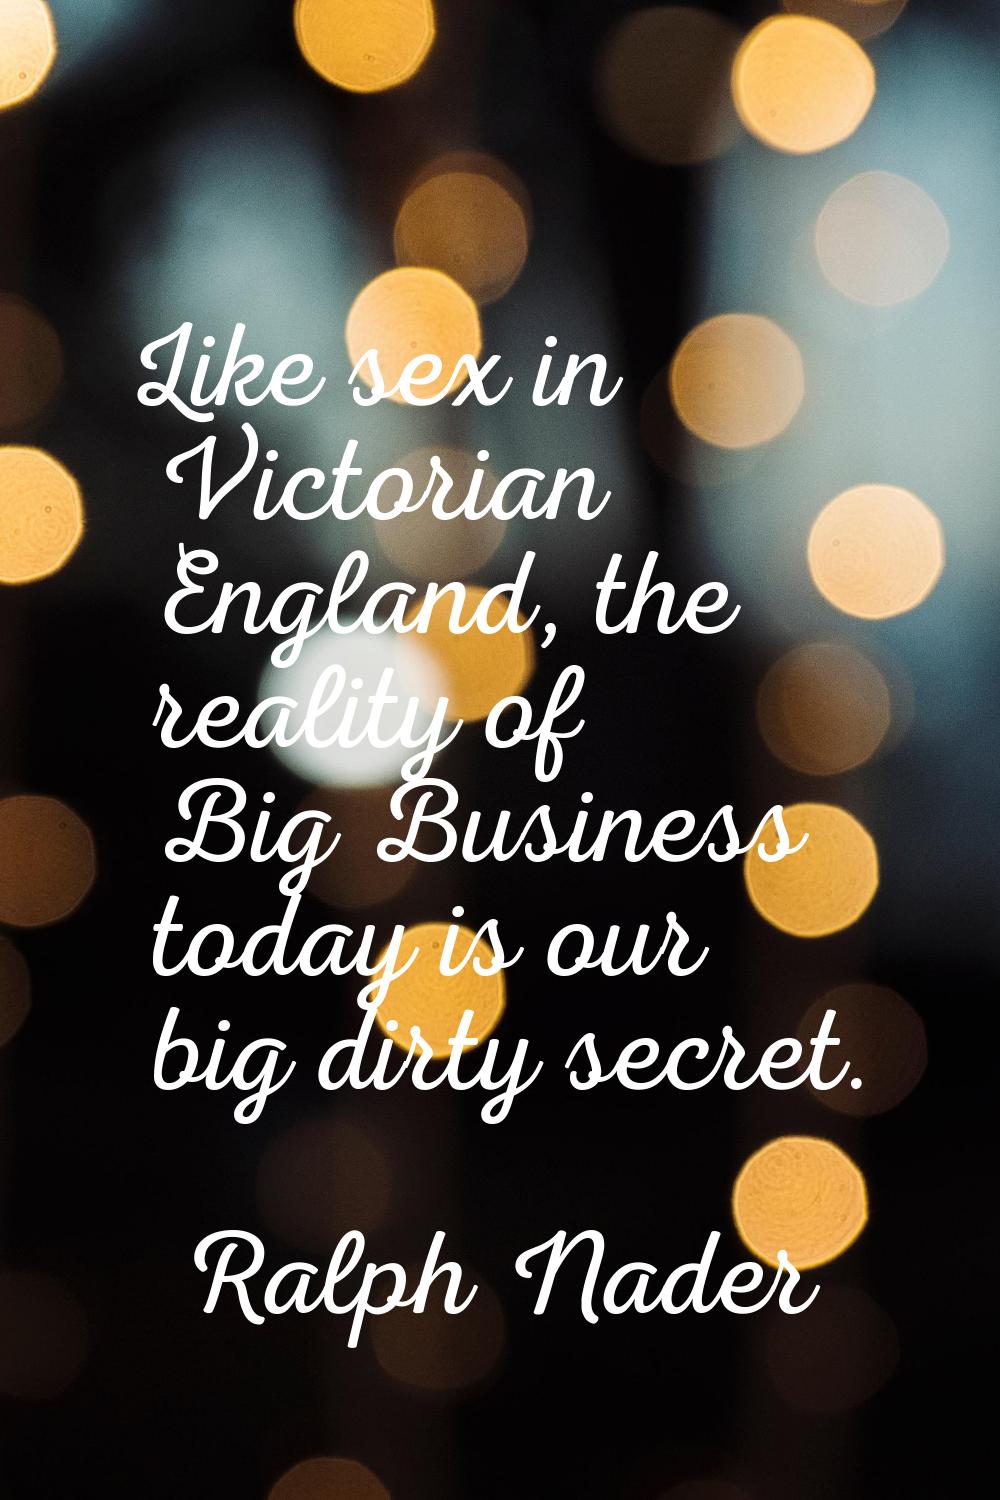 Like sex in Victorian England, the reality of Big Business today is our big dirty secret.